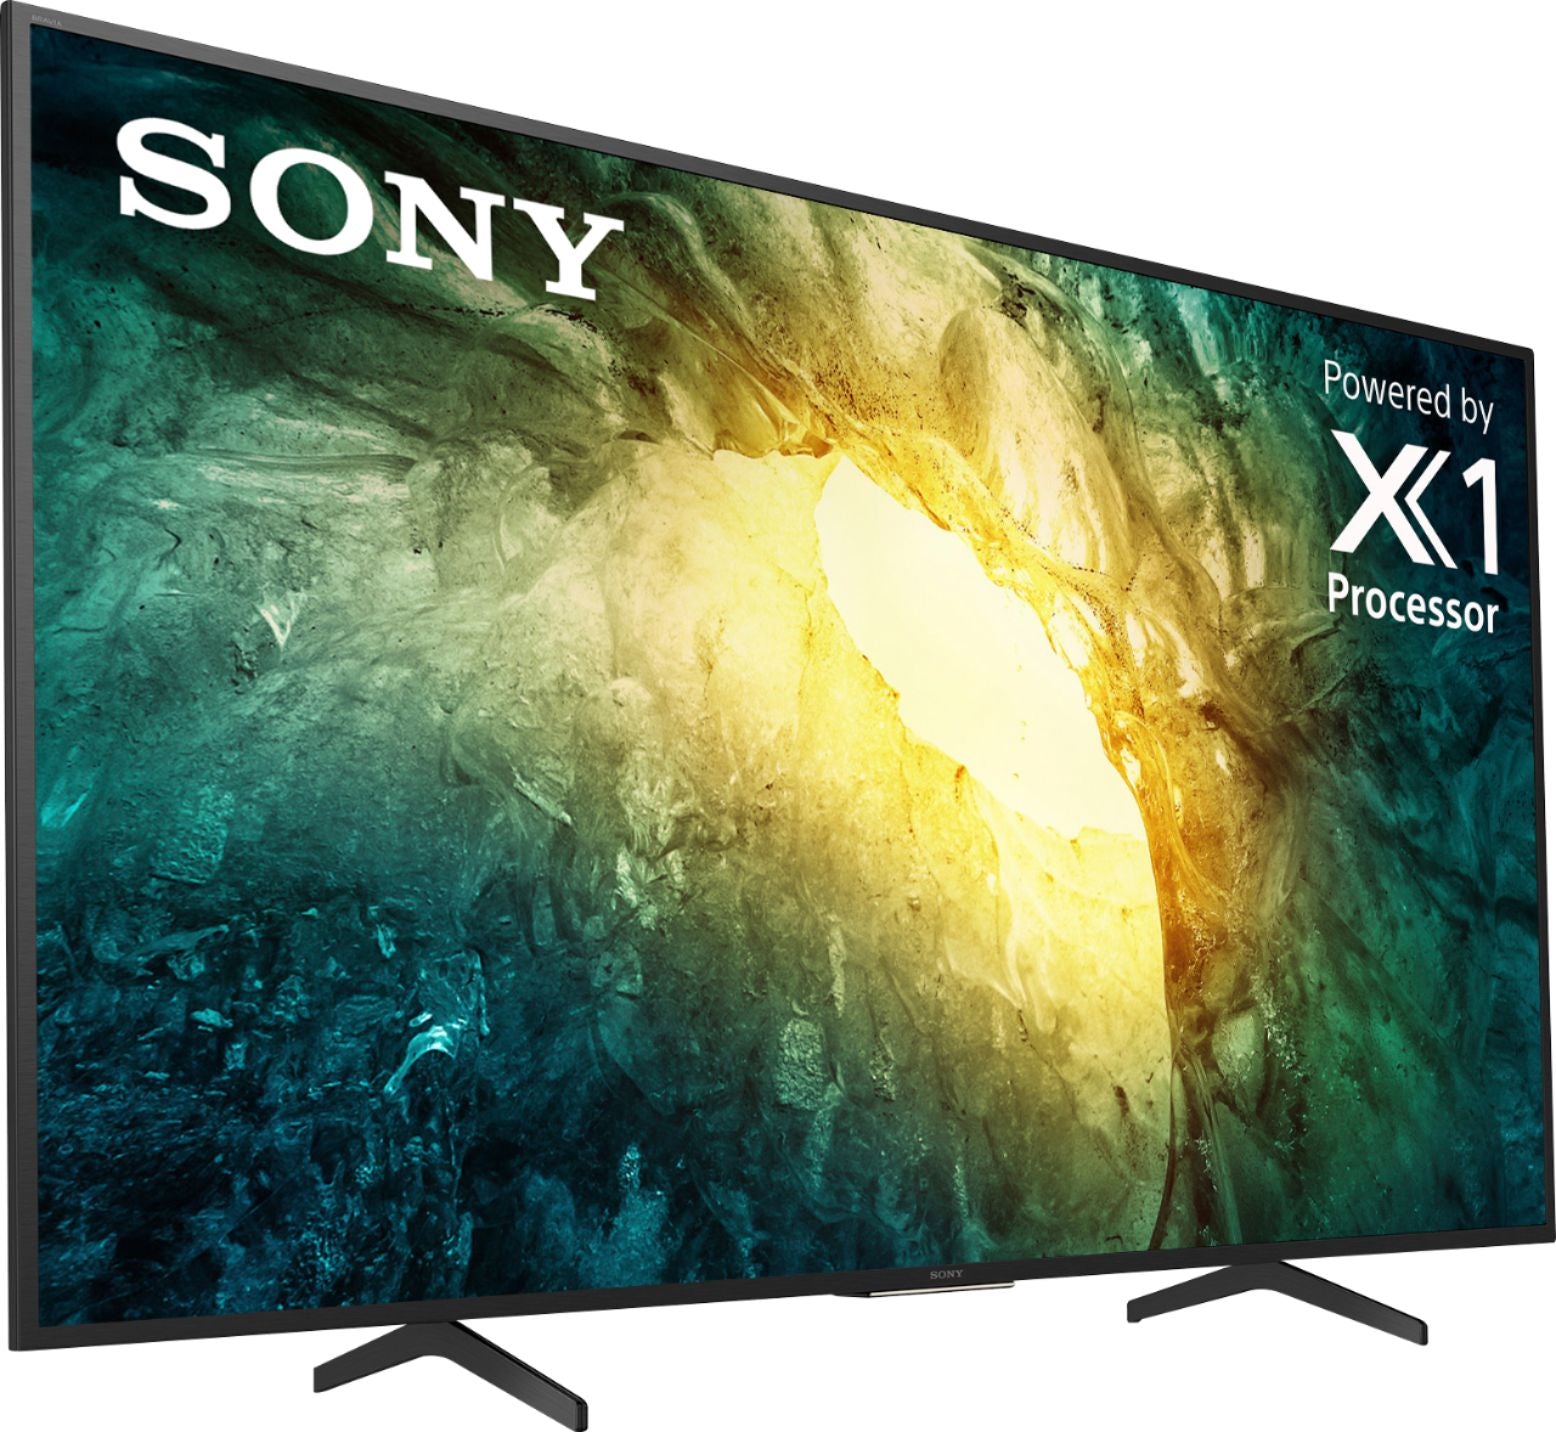 Sony 55" Class X750H Series LED 4K UHD Smart Android TV(Refurbished)